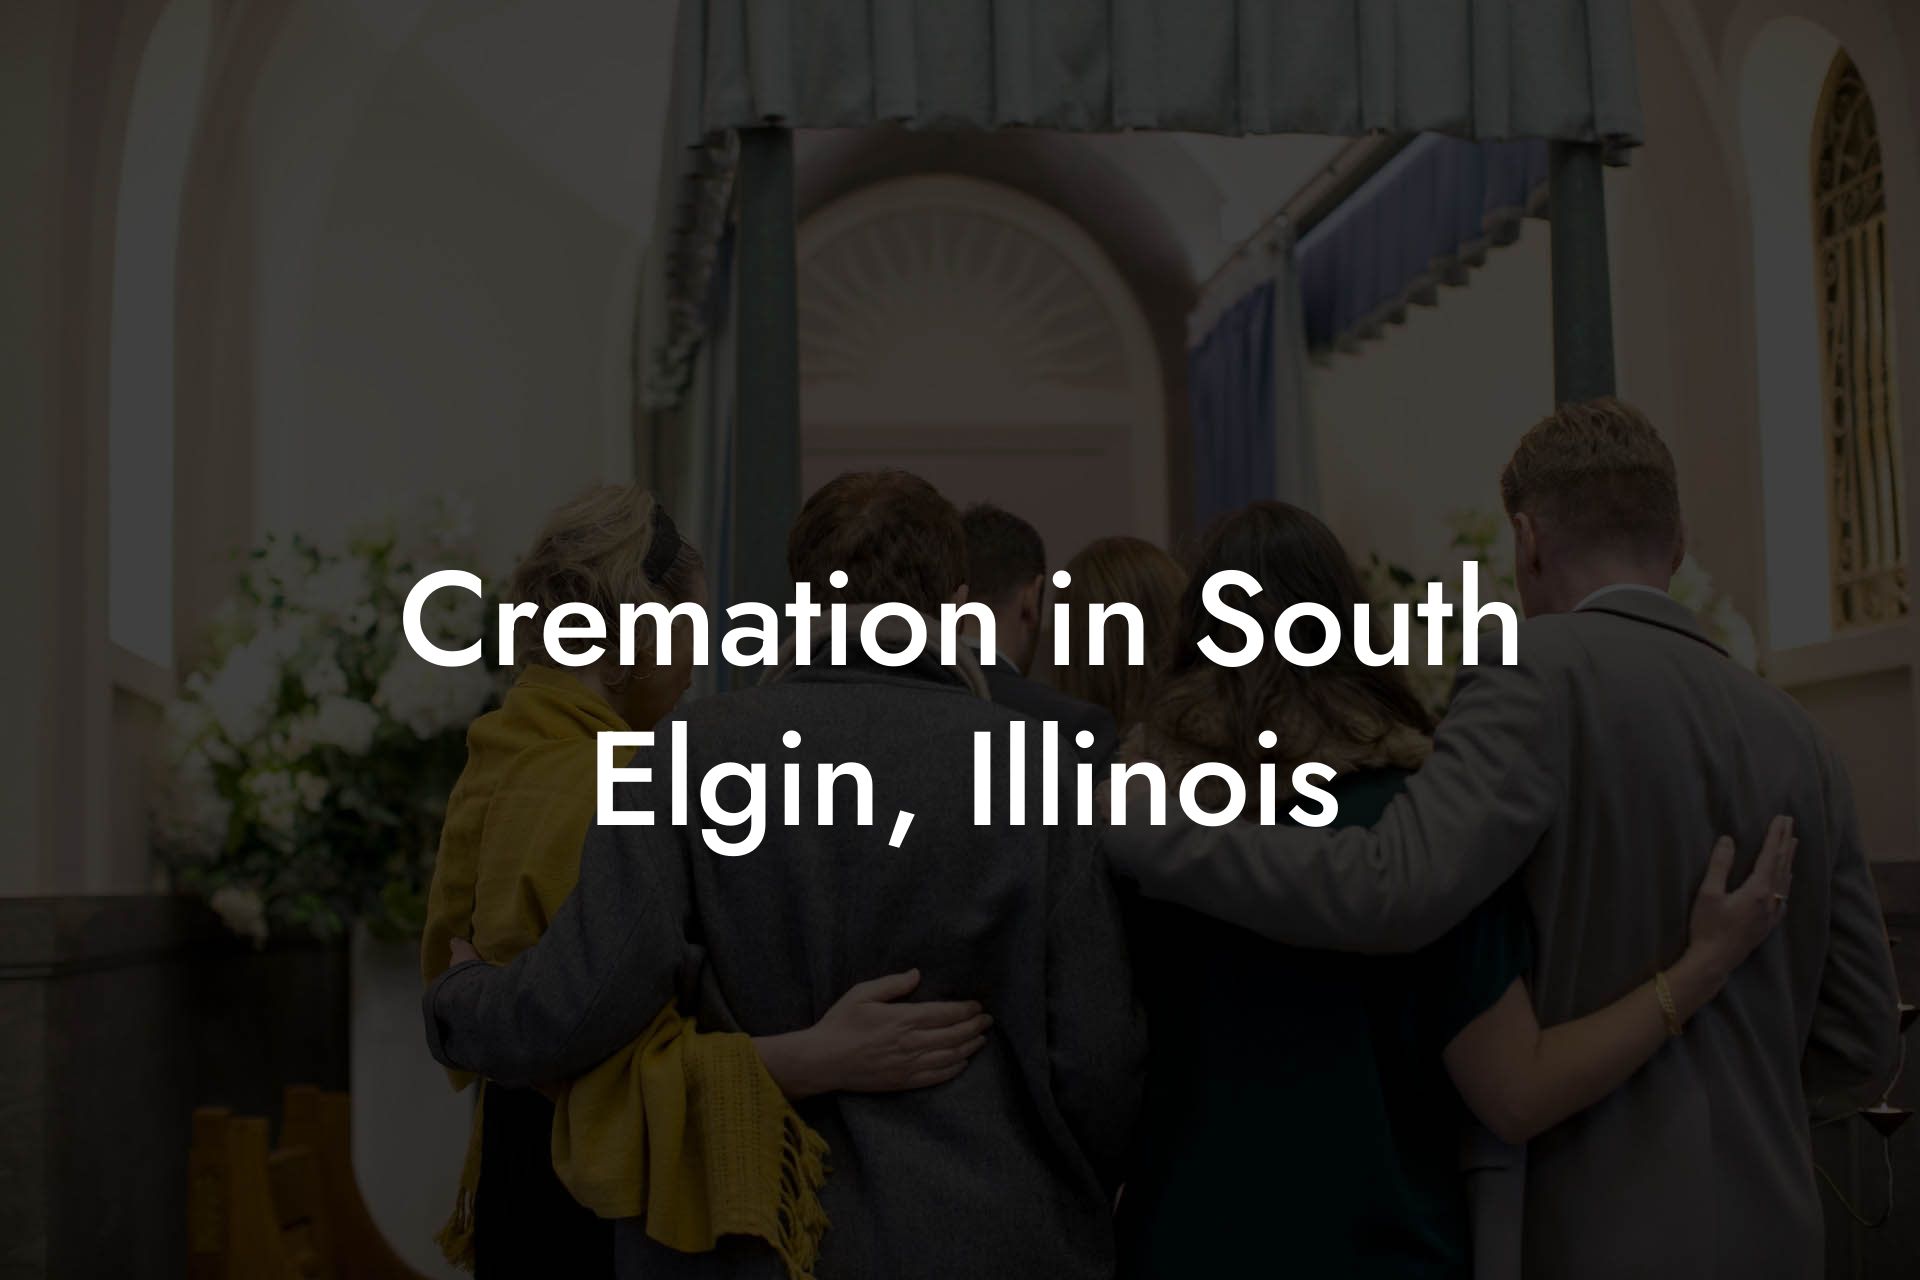 Cremation in South Elgin, Illinois